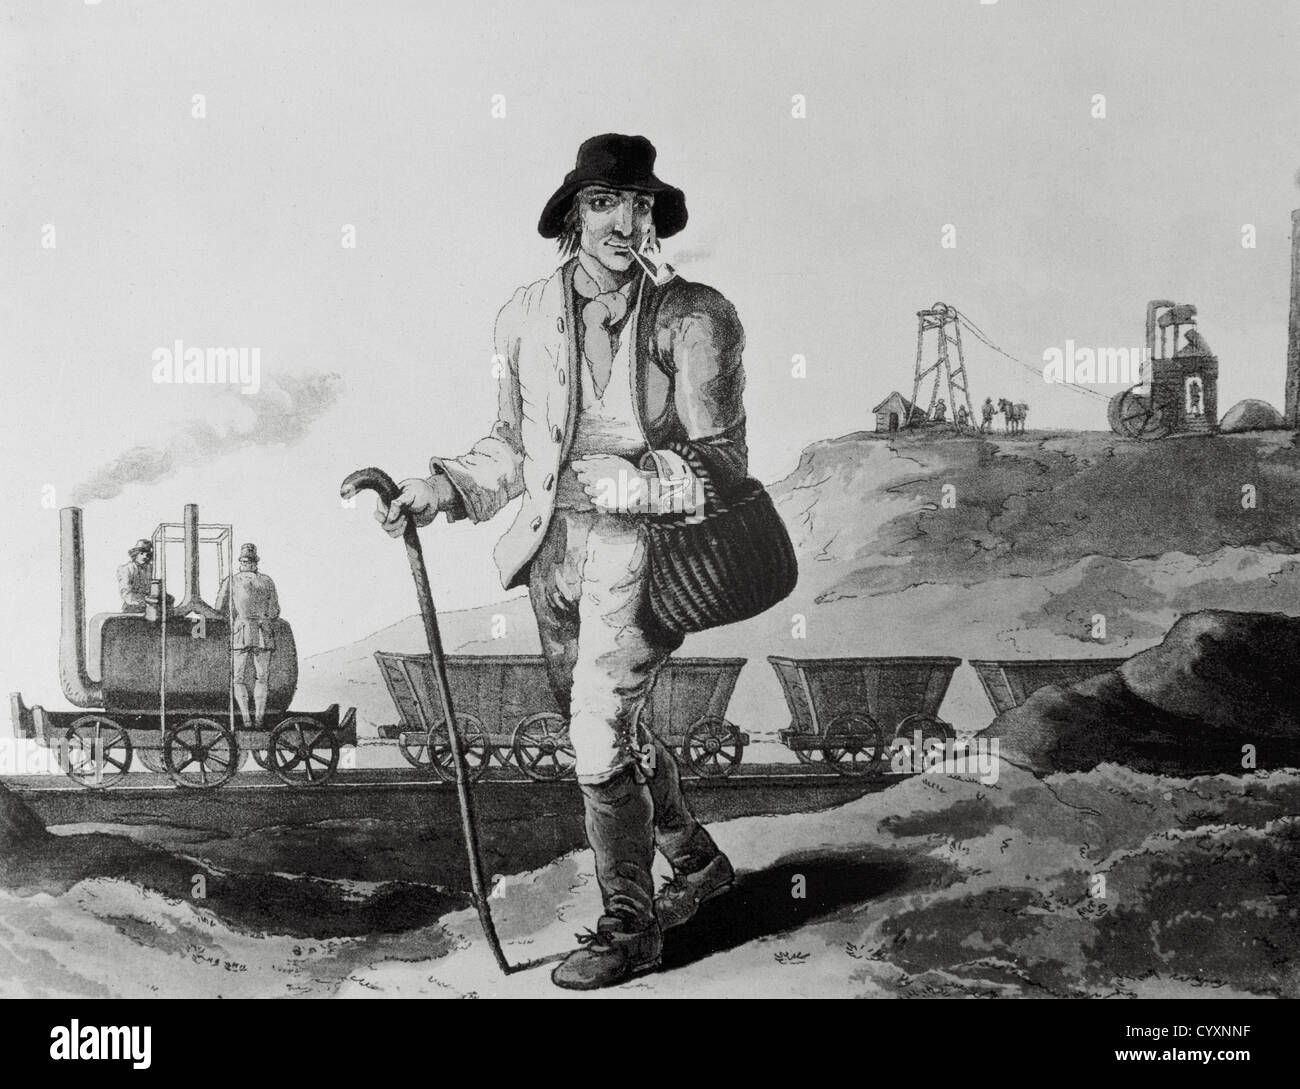 Industrial Revolution. Nineteenth century. English miner and transport of coal mined. Stock Photo